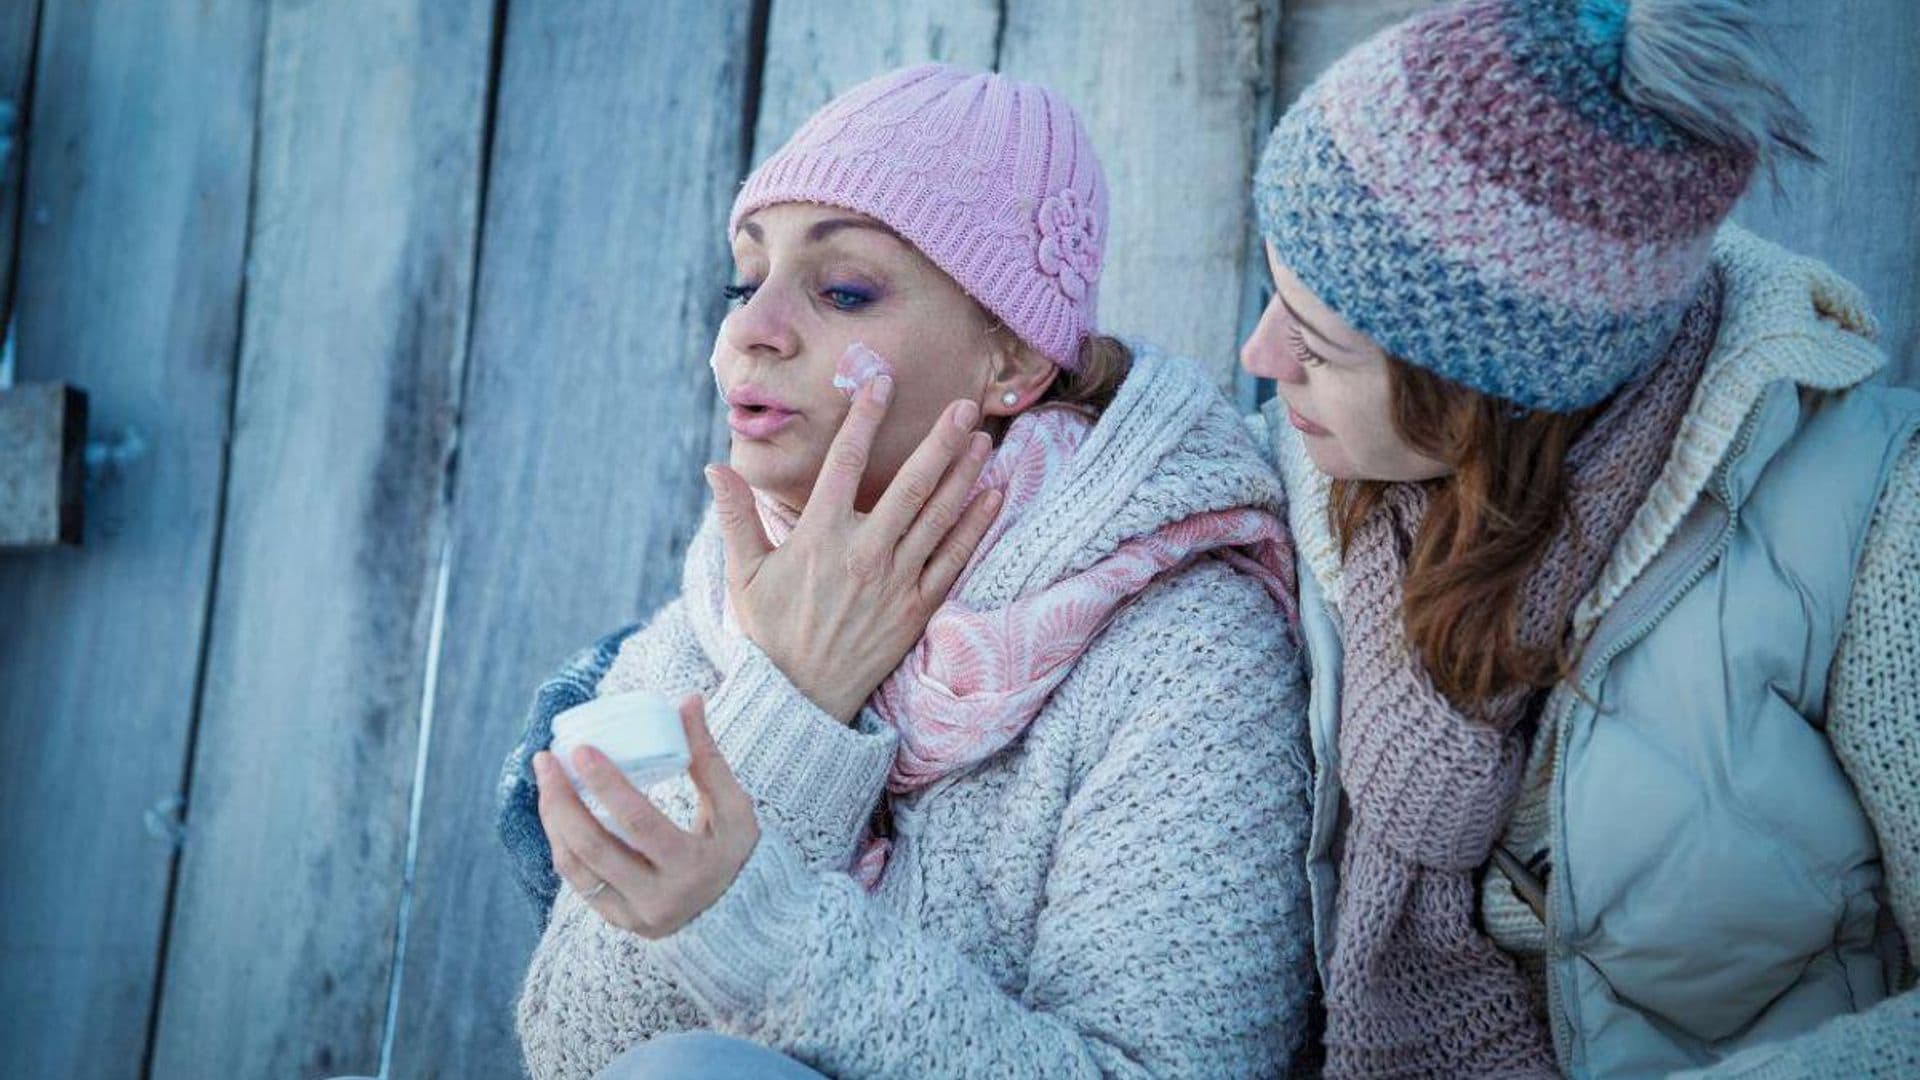 8 tips for healthy winter skin according to a dermatologist